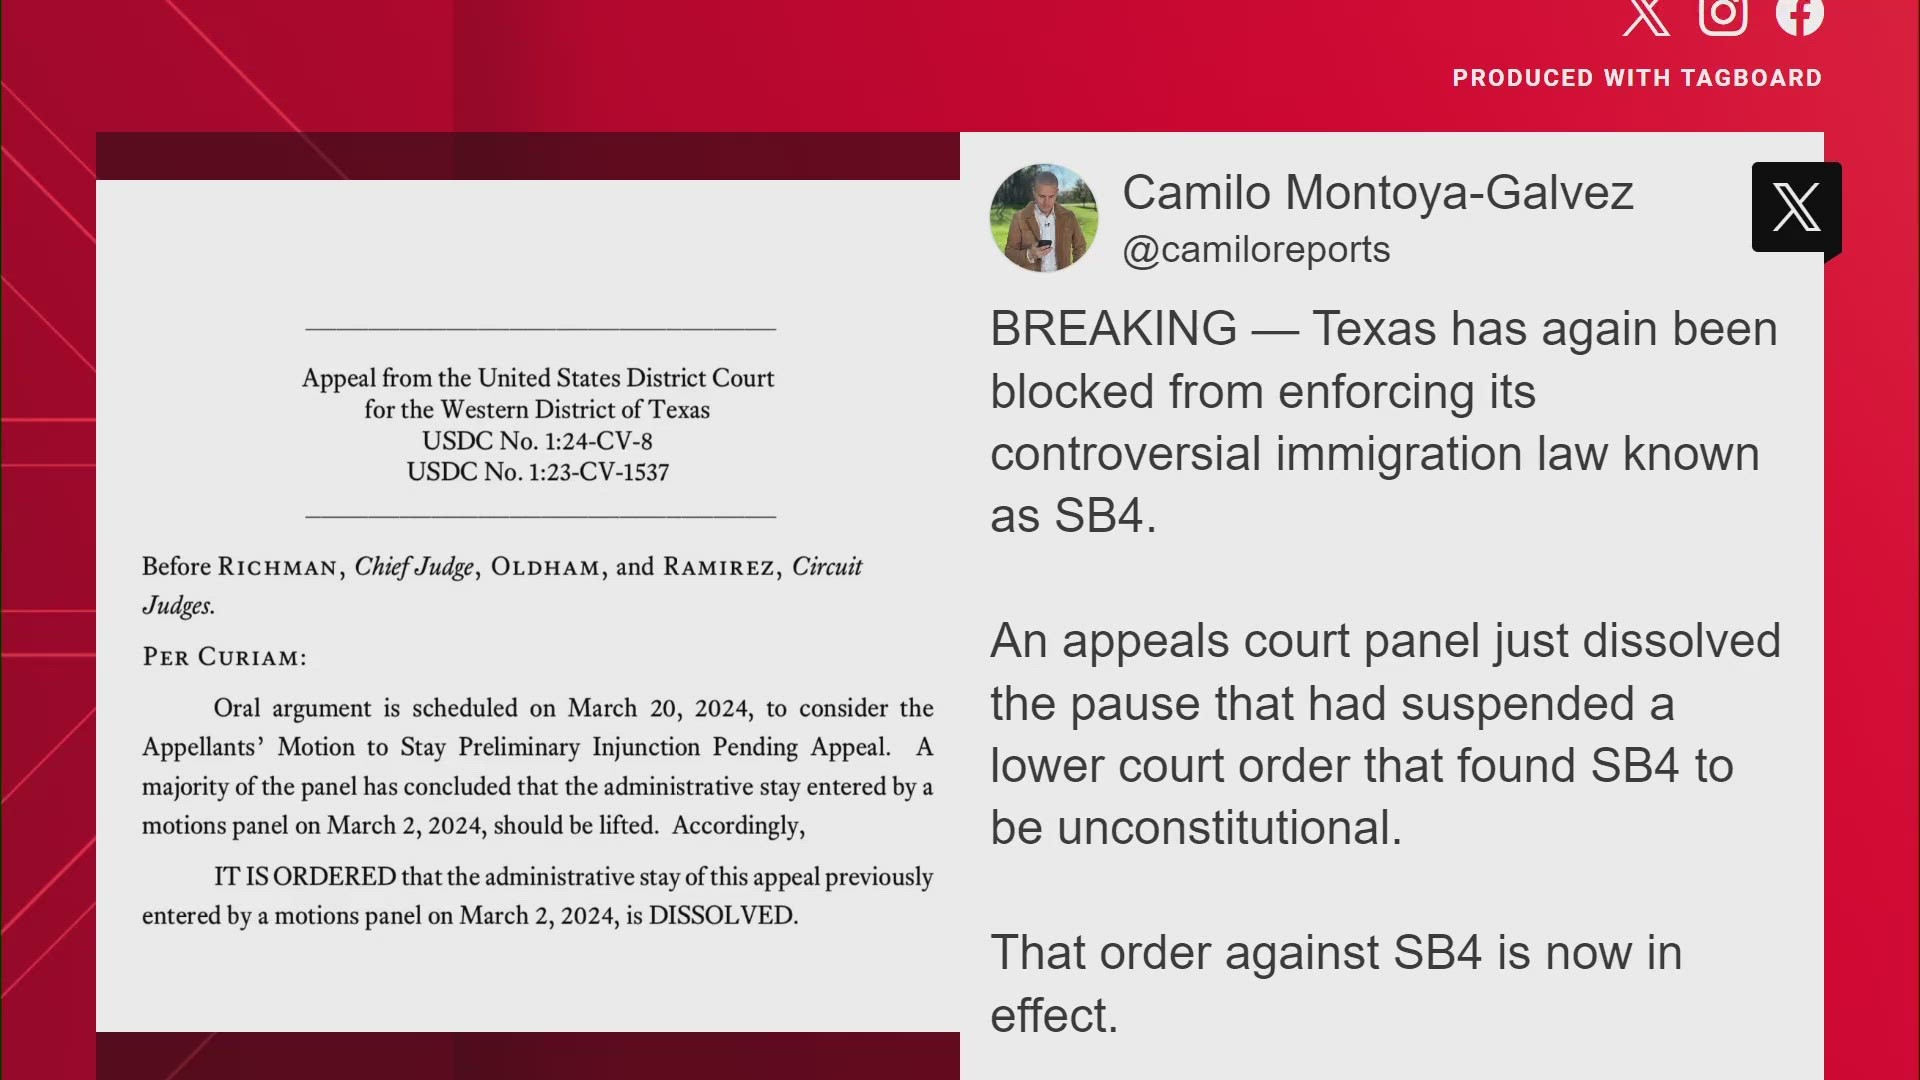 SB4 allows any police officer in Texas to arrest migrants for illegal entry. A judge could then order them to leave the U.S.